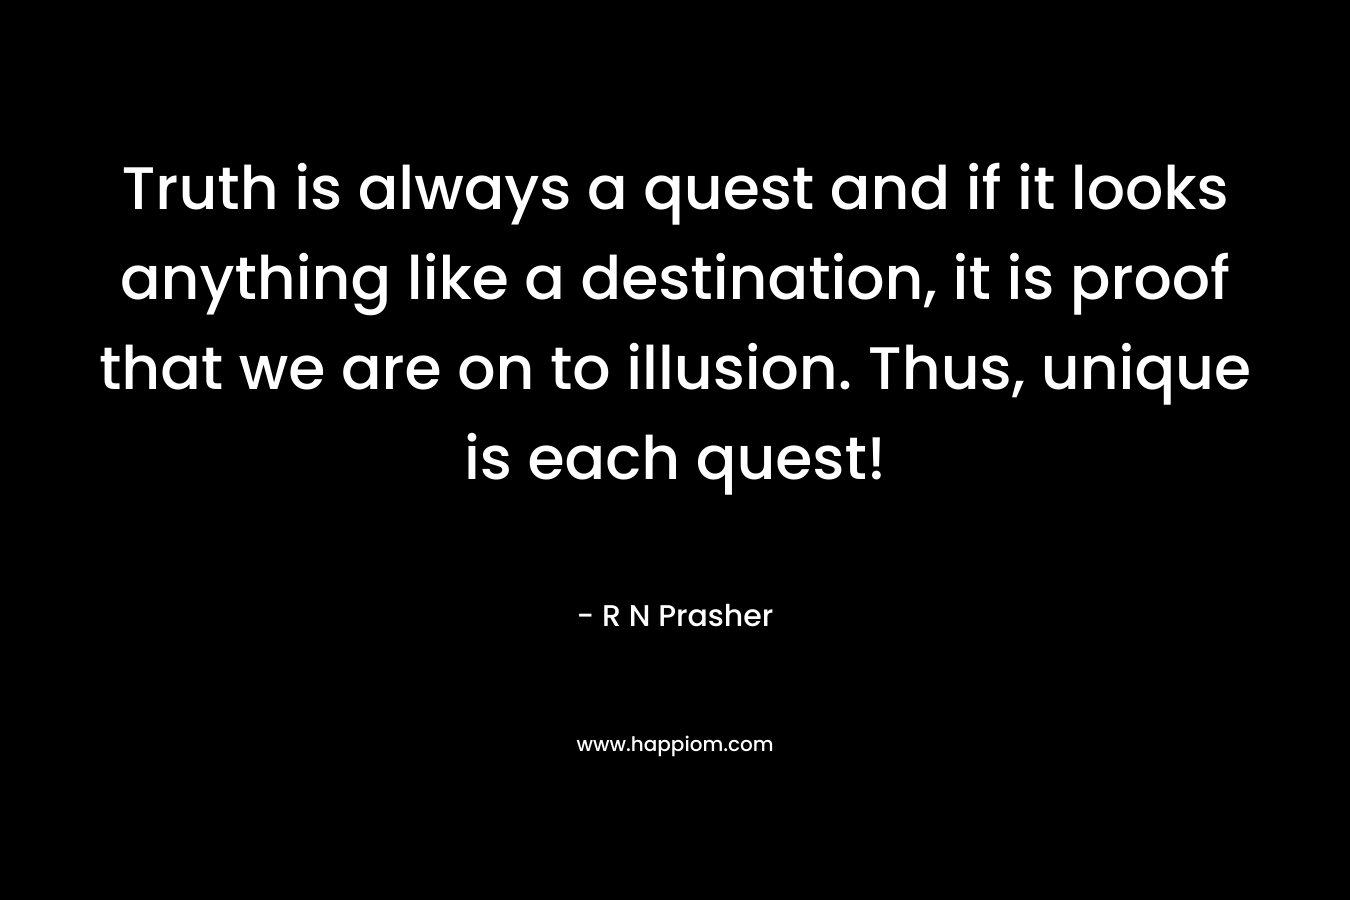 Truth is always a quest and if it looks anything like a destination, it is proof that we are on to illusion. Thus, unique is each quest!